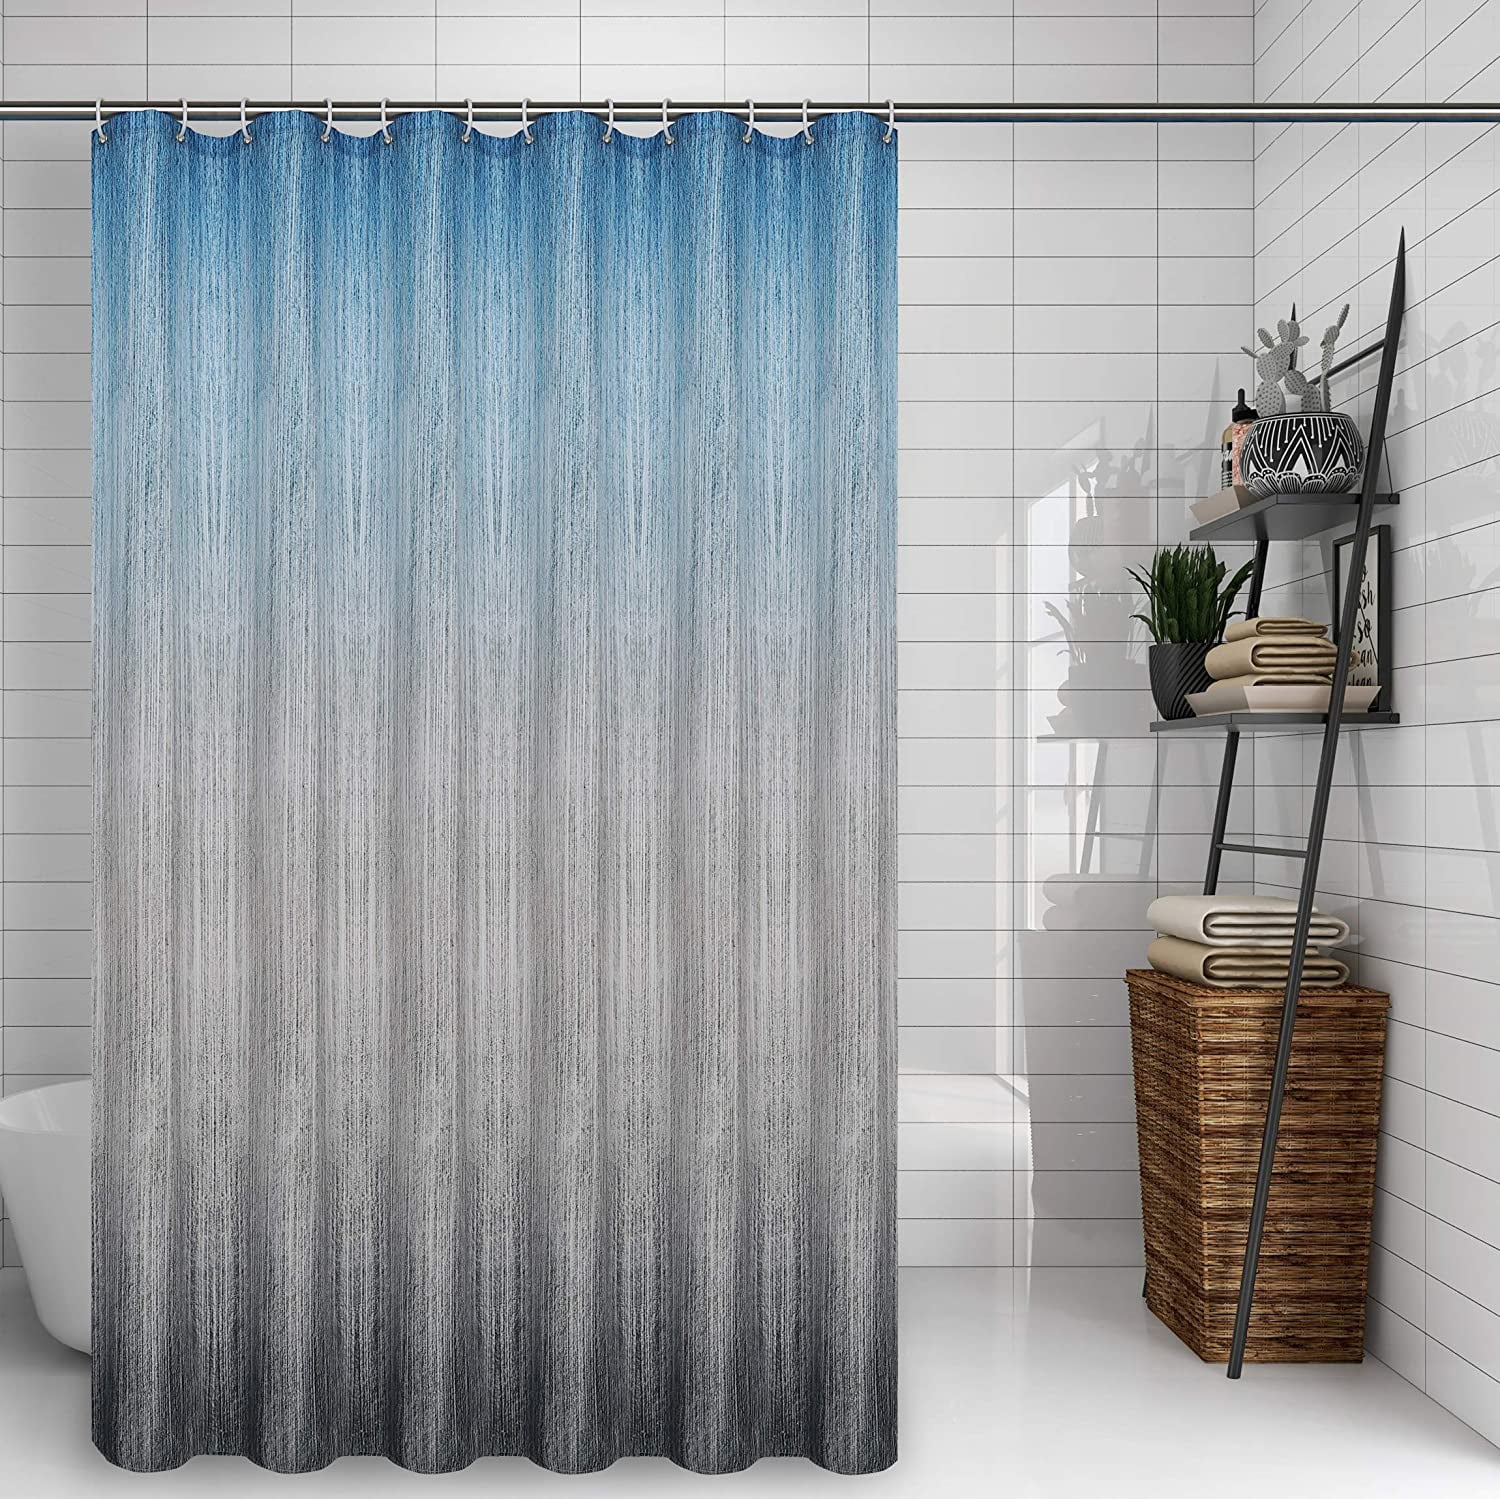 Extra Wide & Long Waterproof Shower Curtain Bathroom Curtains With 12 Ring Hooks 